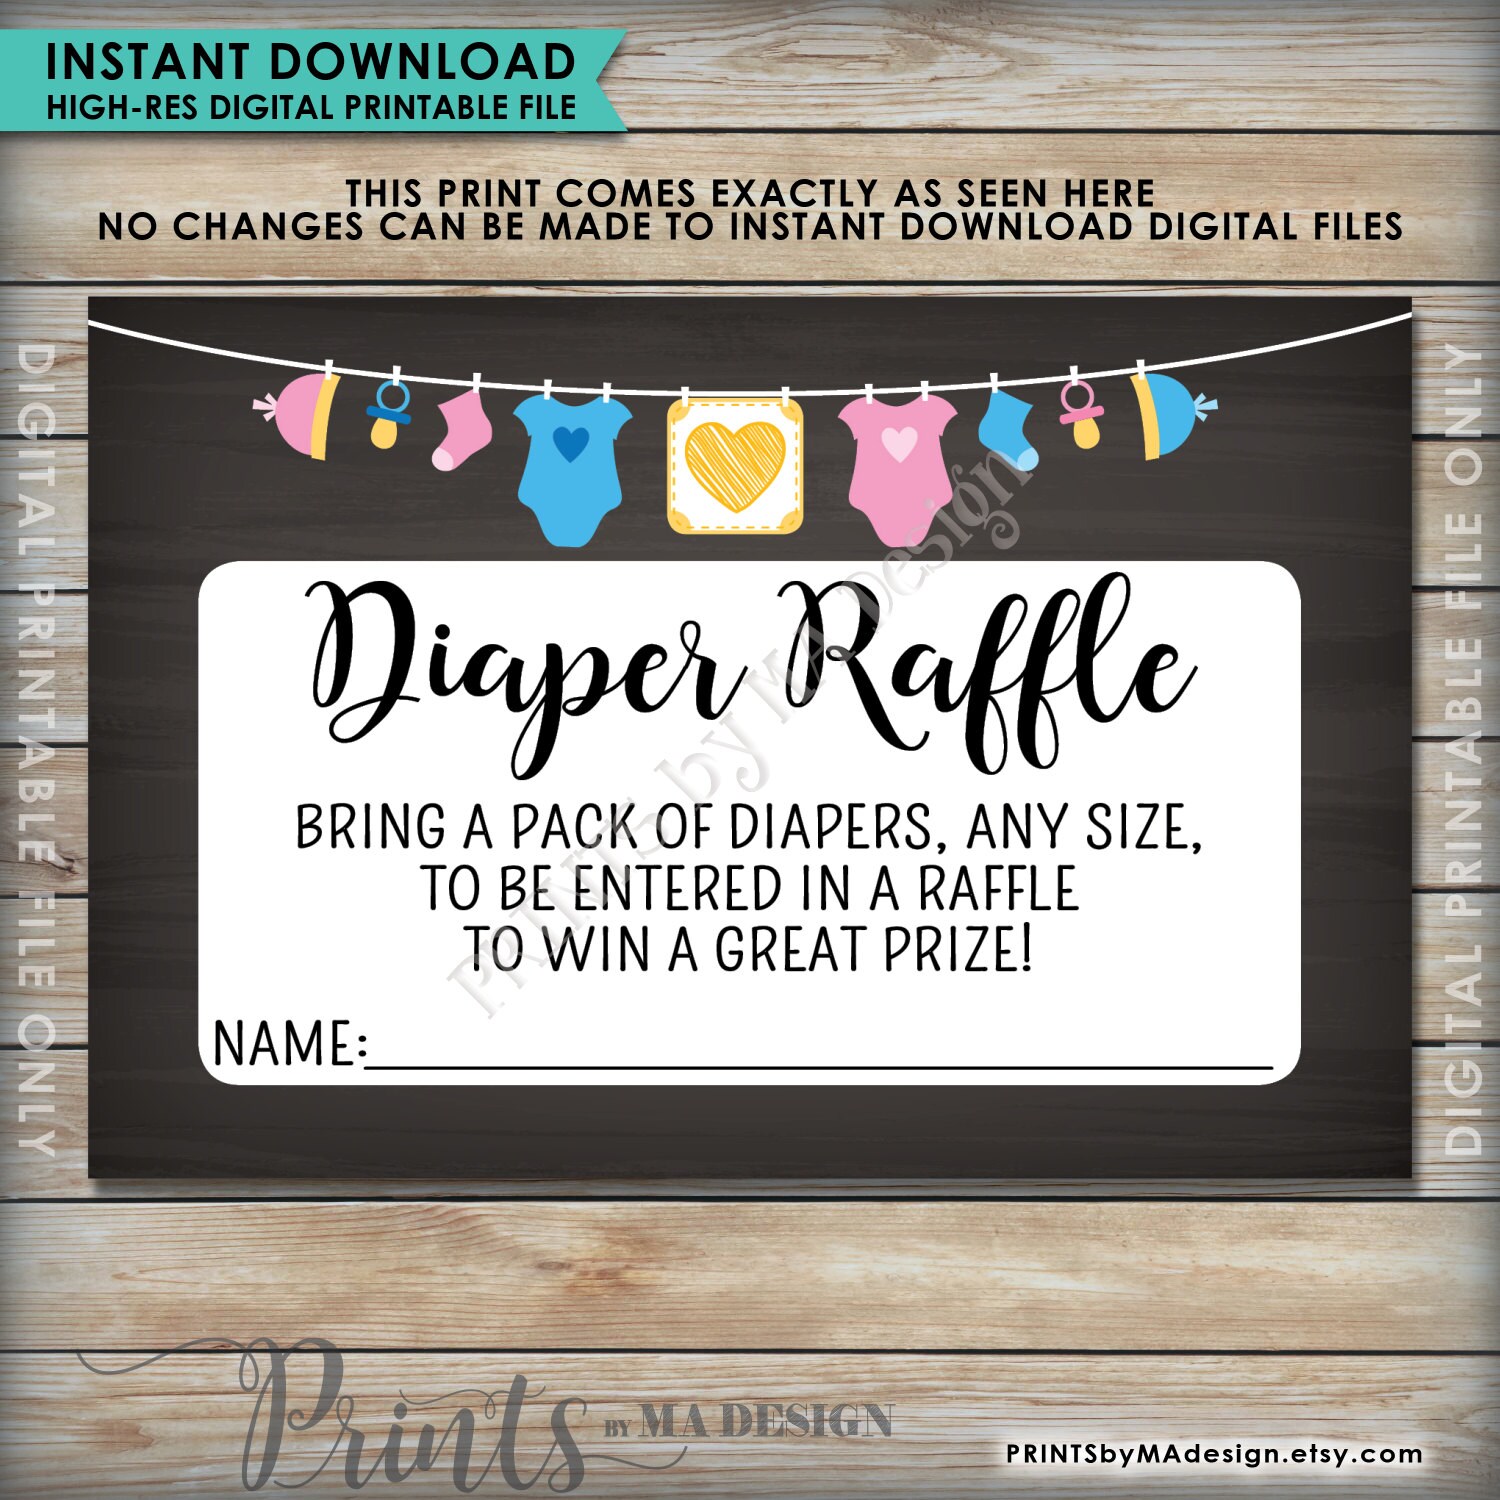 Diaper Raffle Ticket Bring Diapers To Win A Prize Baby Shower Raffle 